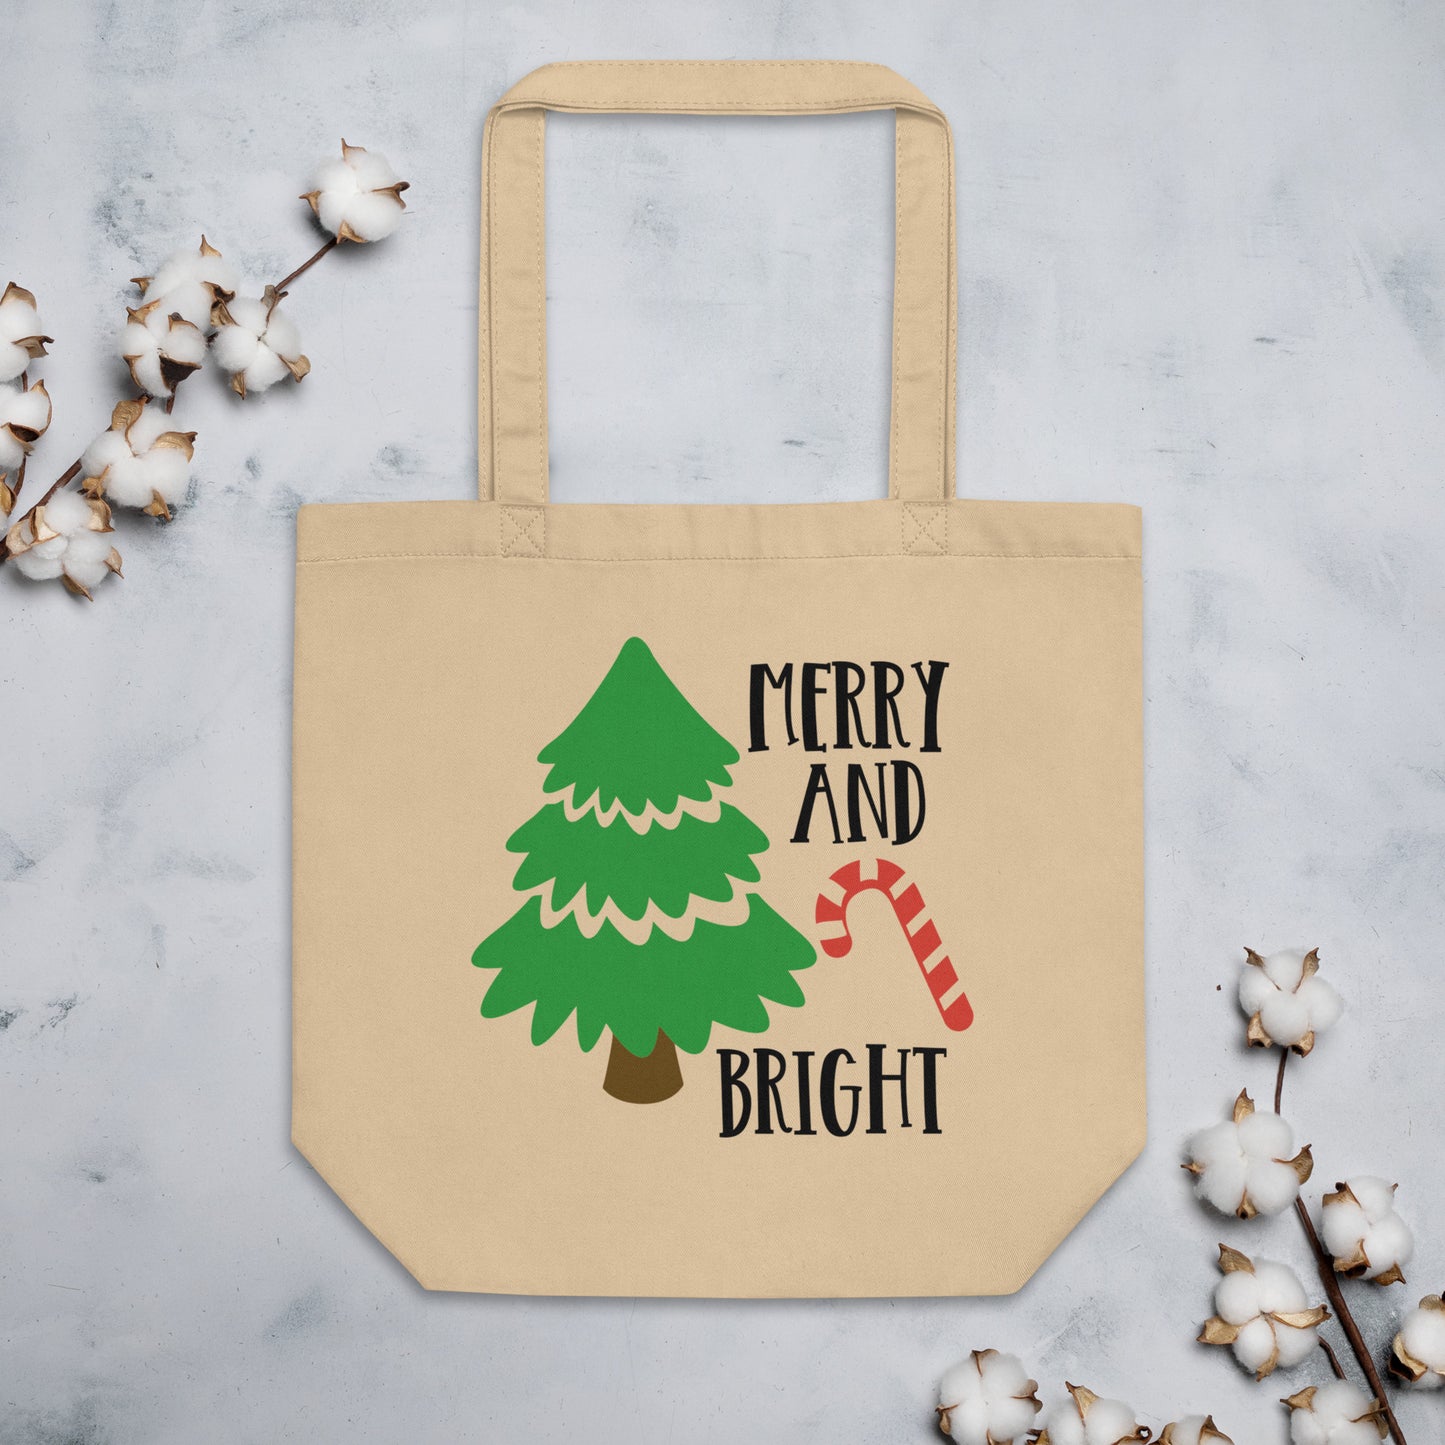 Merry and Bright Eco Tote Bag